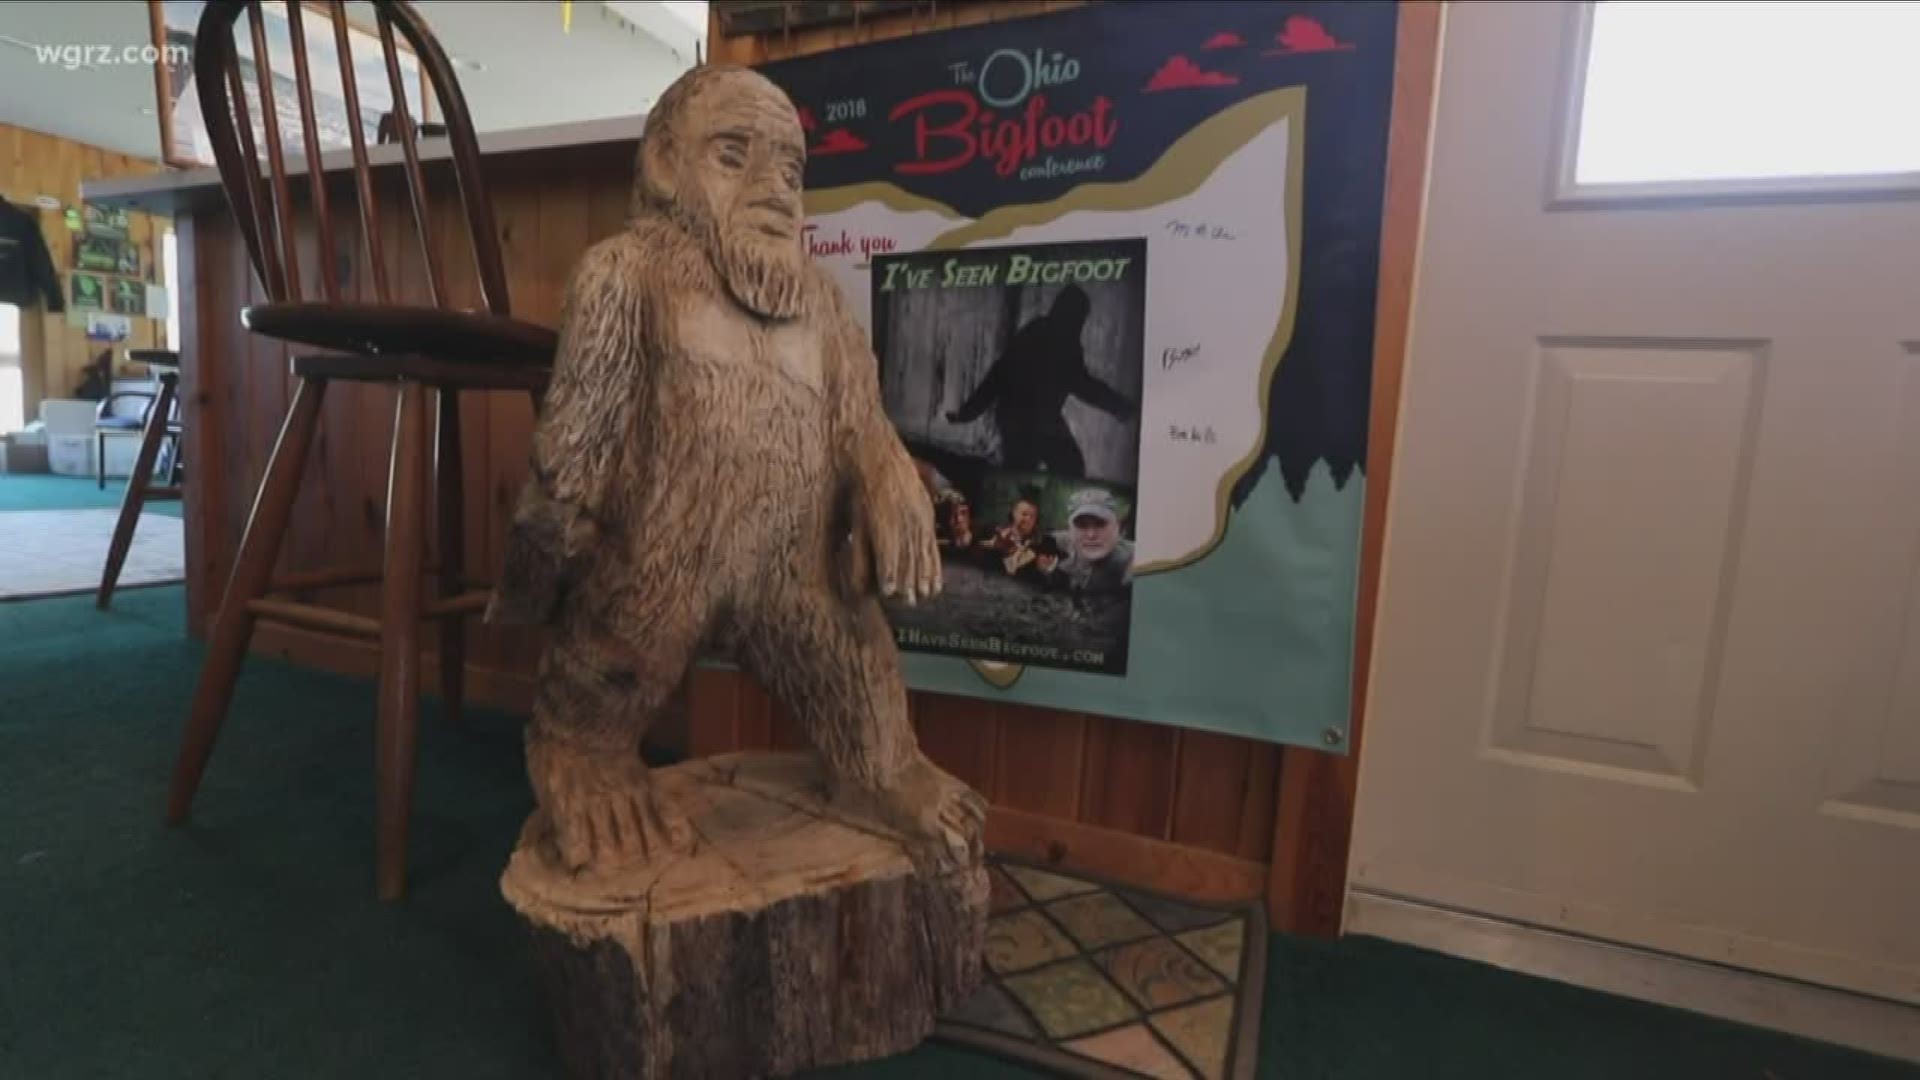 Bigfoot fever in WNY this weekend in Mayville